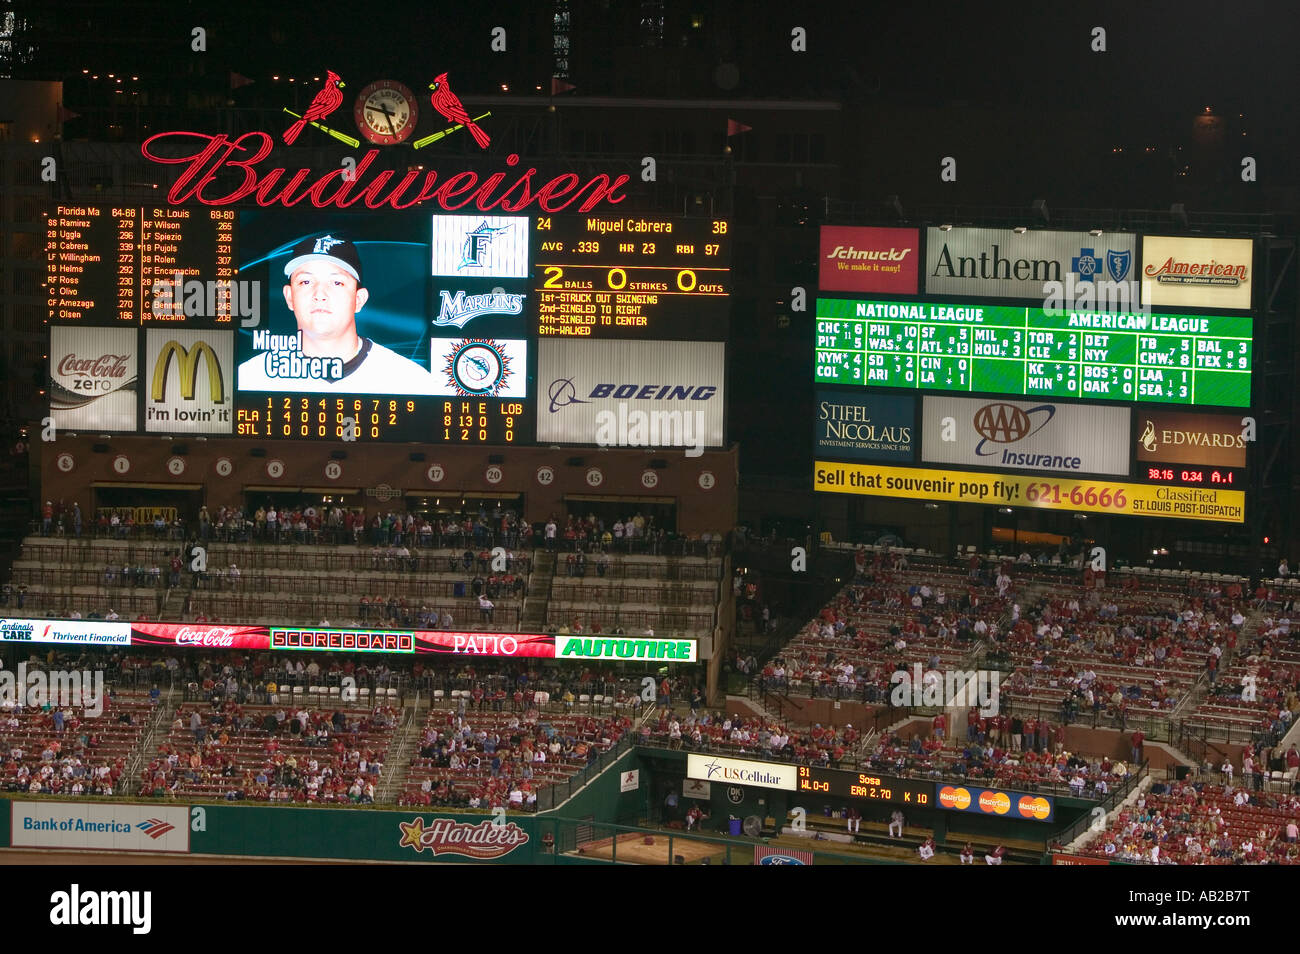 In a night game and a light rain mist a scoreboard is seen at the 3rd Busch Stadium St Louis Missouri on August 29 2006 Stock Photo